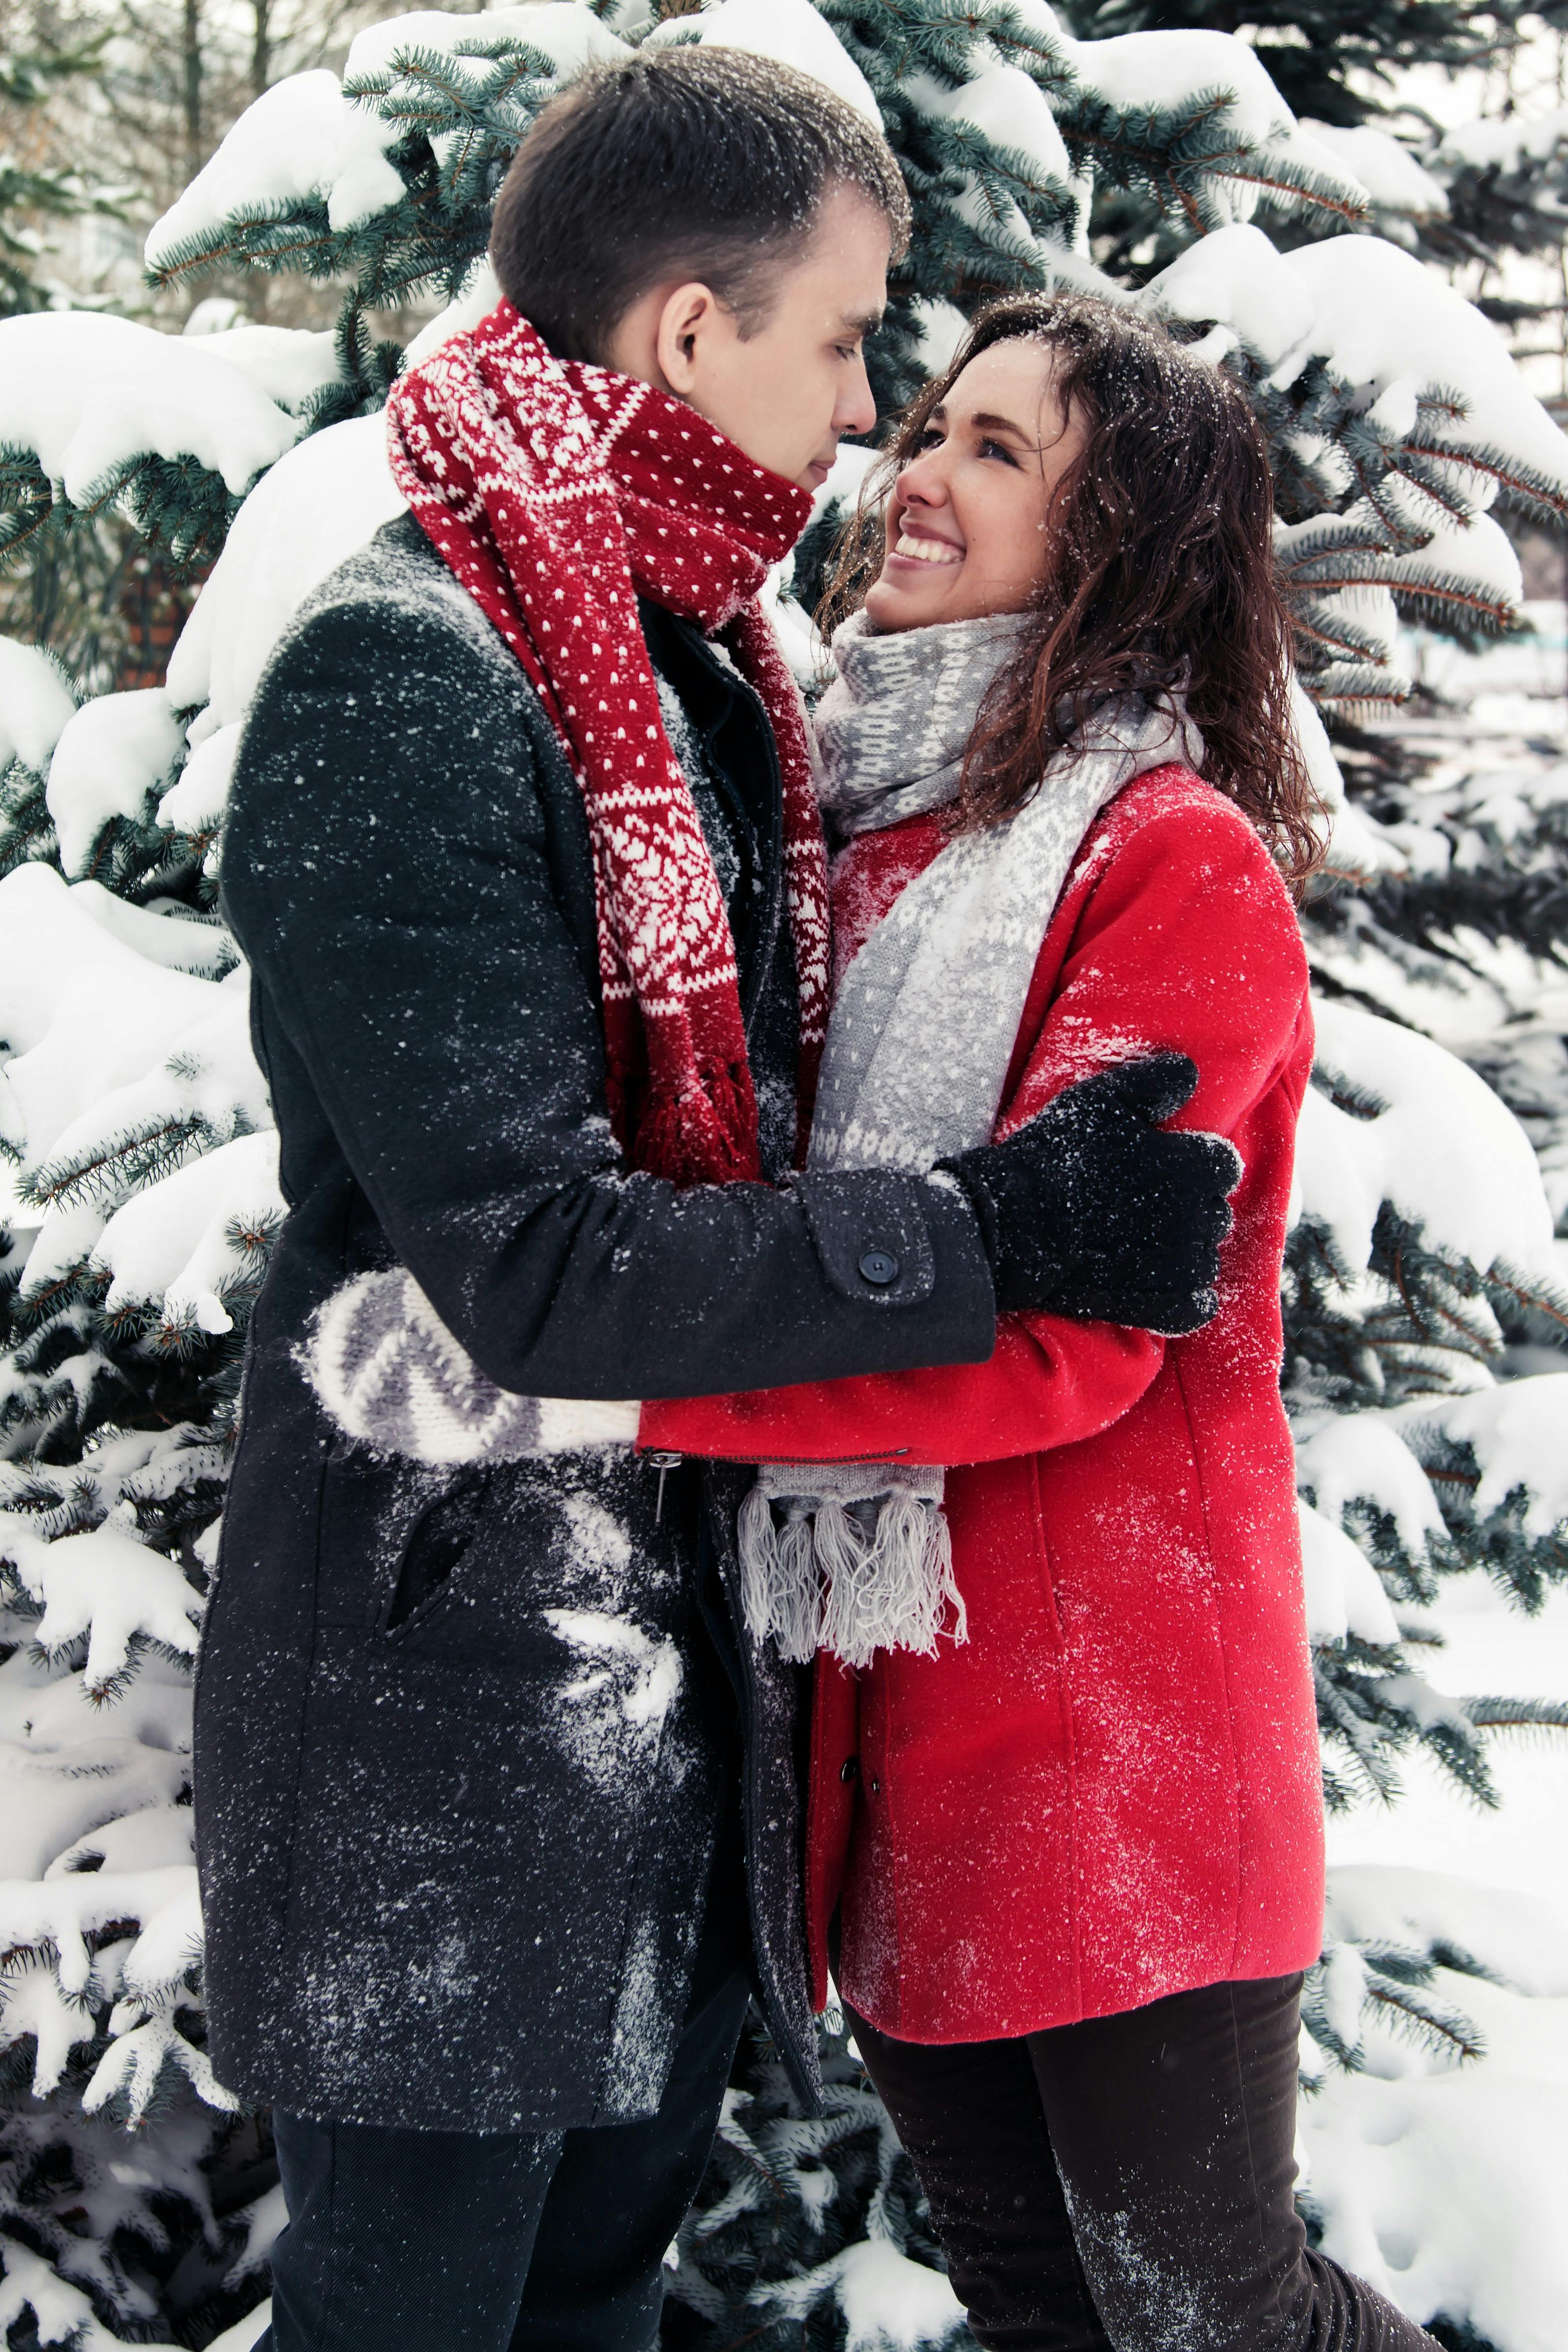 Snow Couple Pictures | Download Free Images on Unsplash